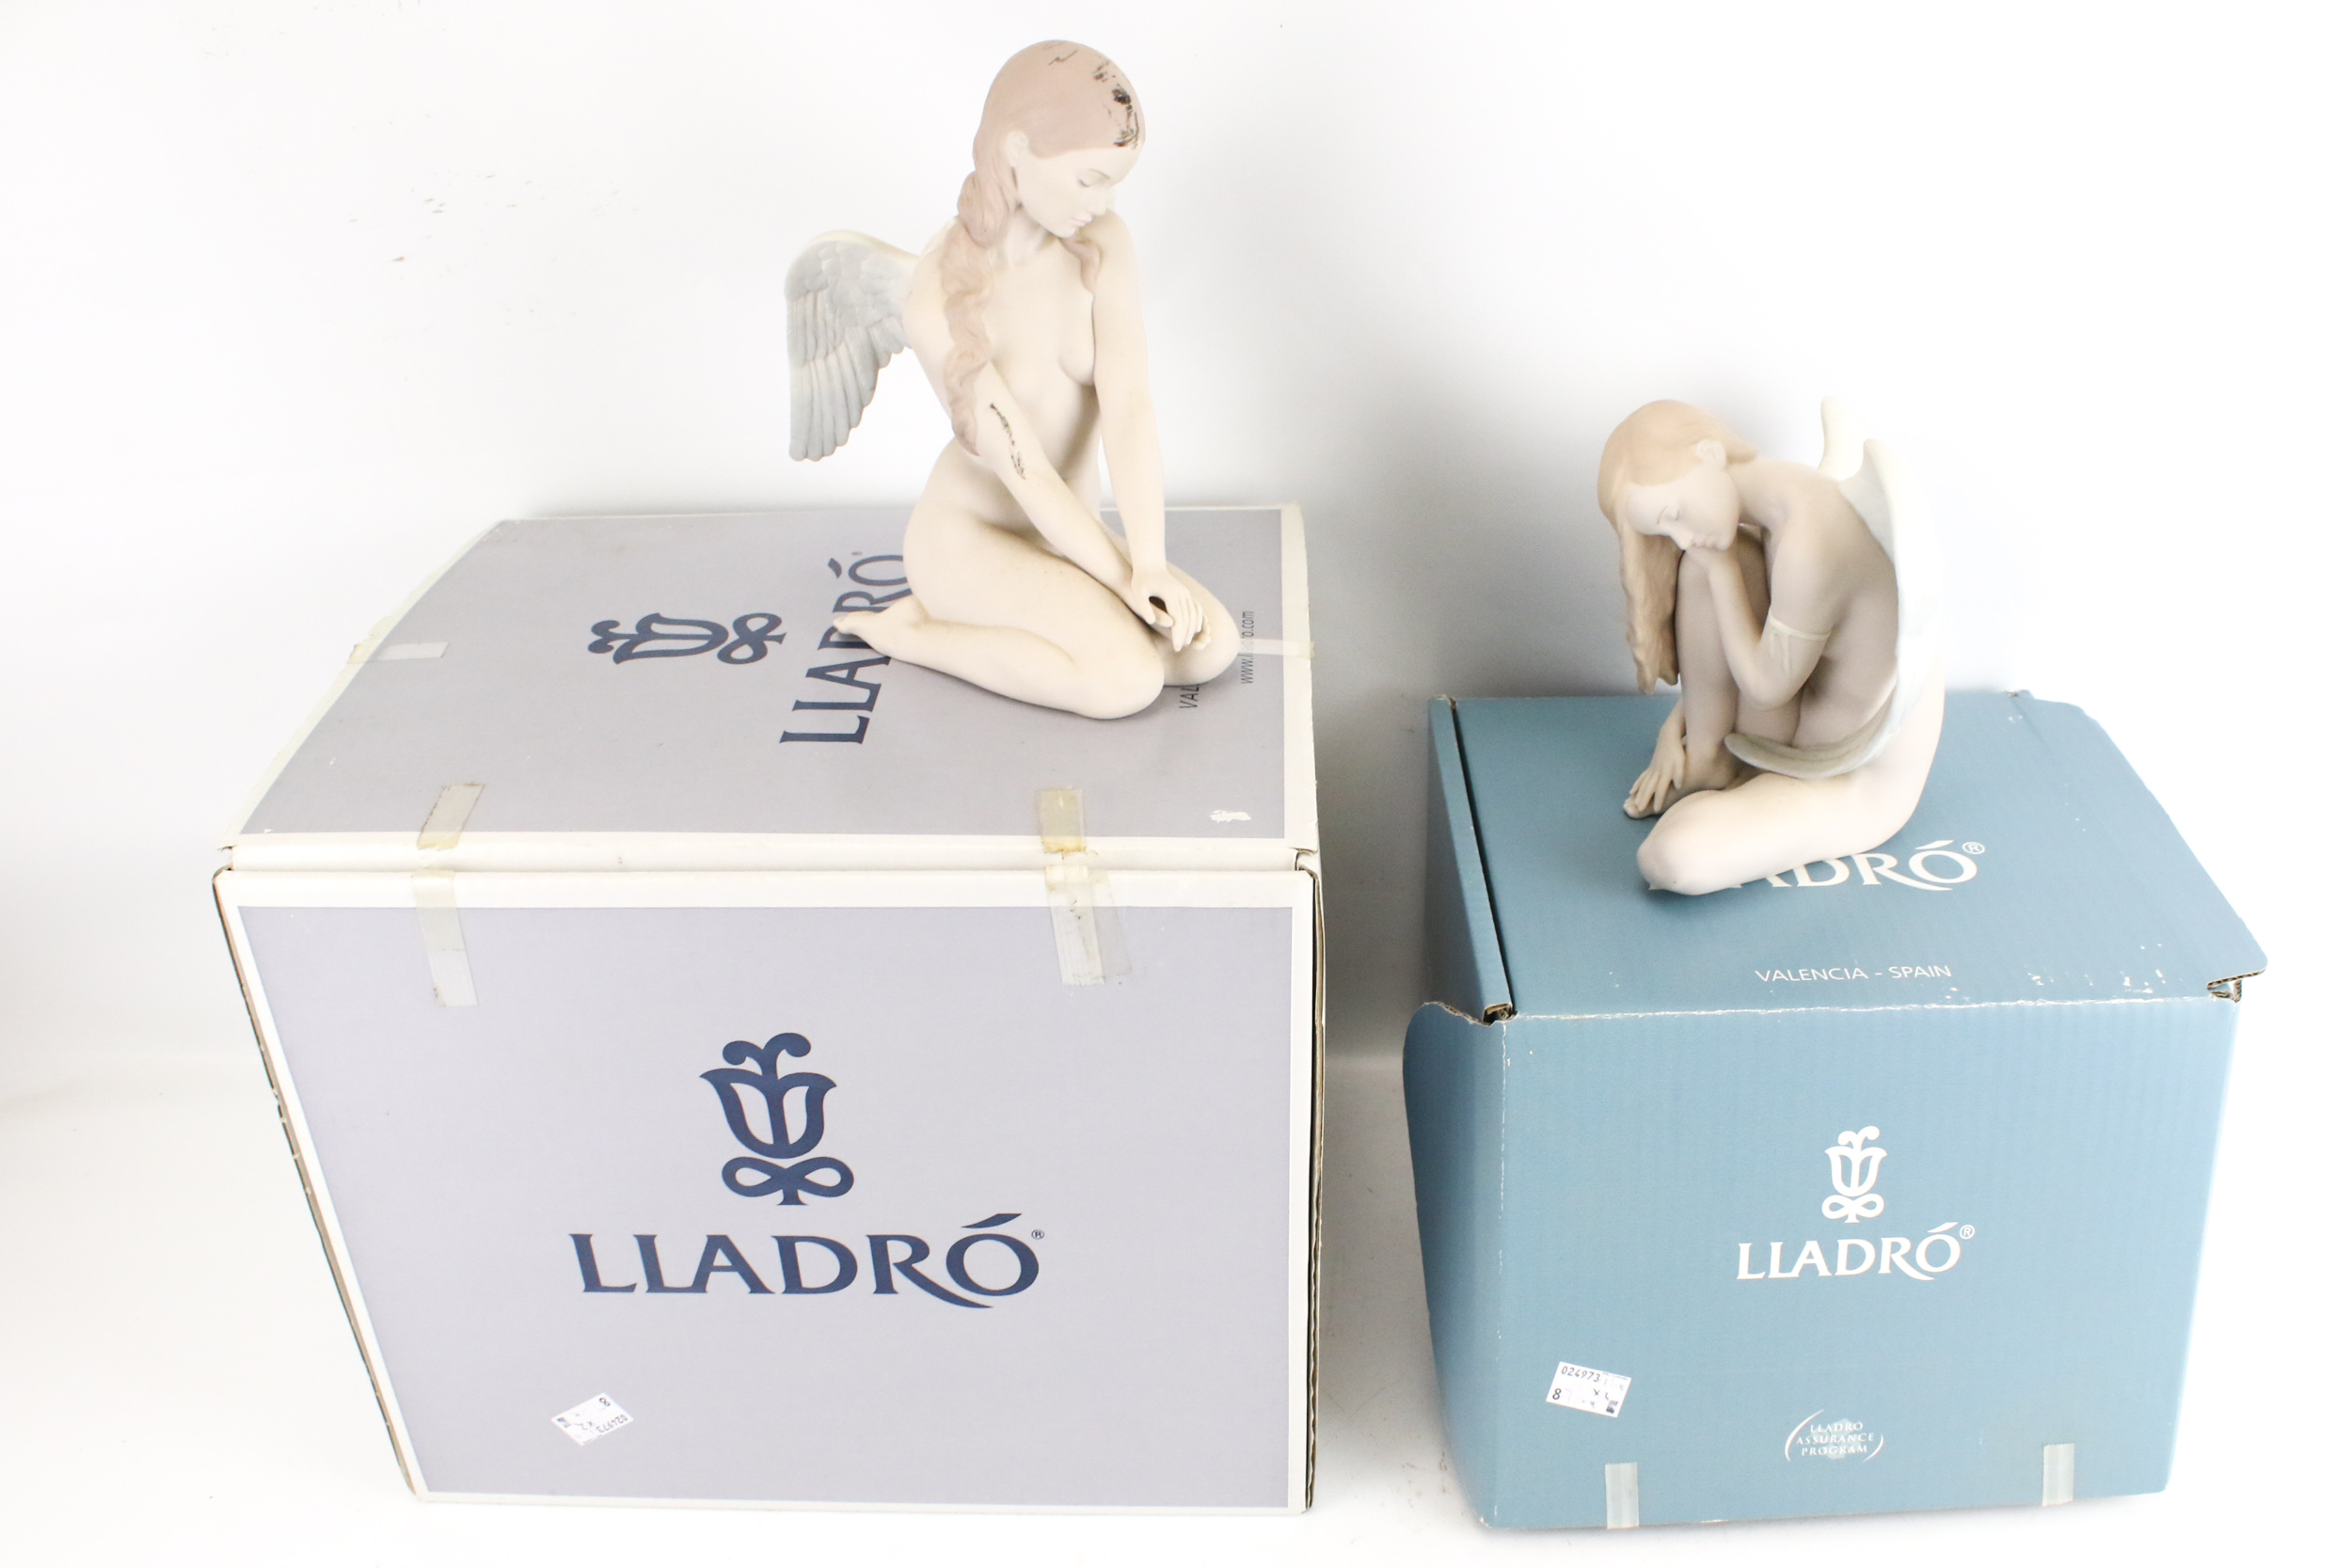 Two Lladro figures.